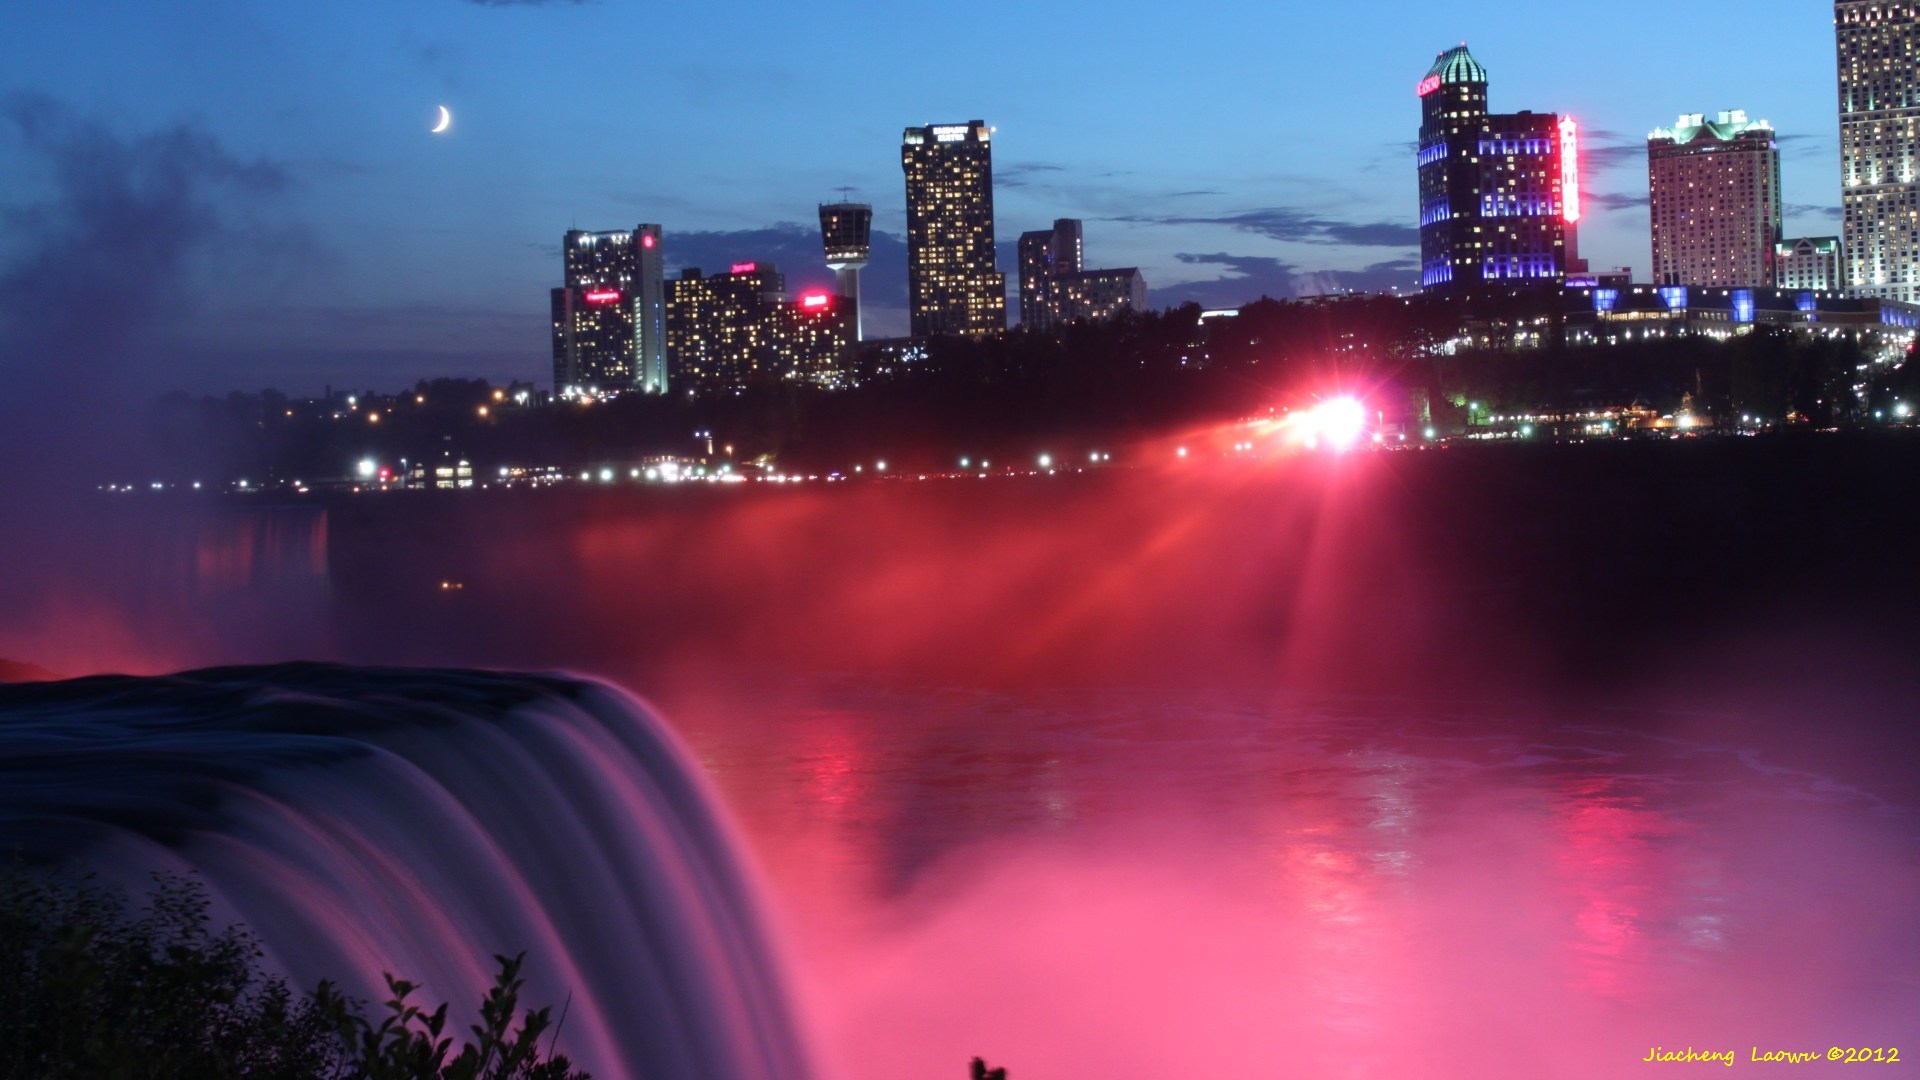 The colorful night of Canadian Niagra